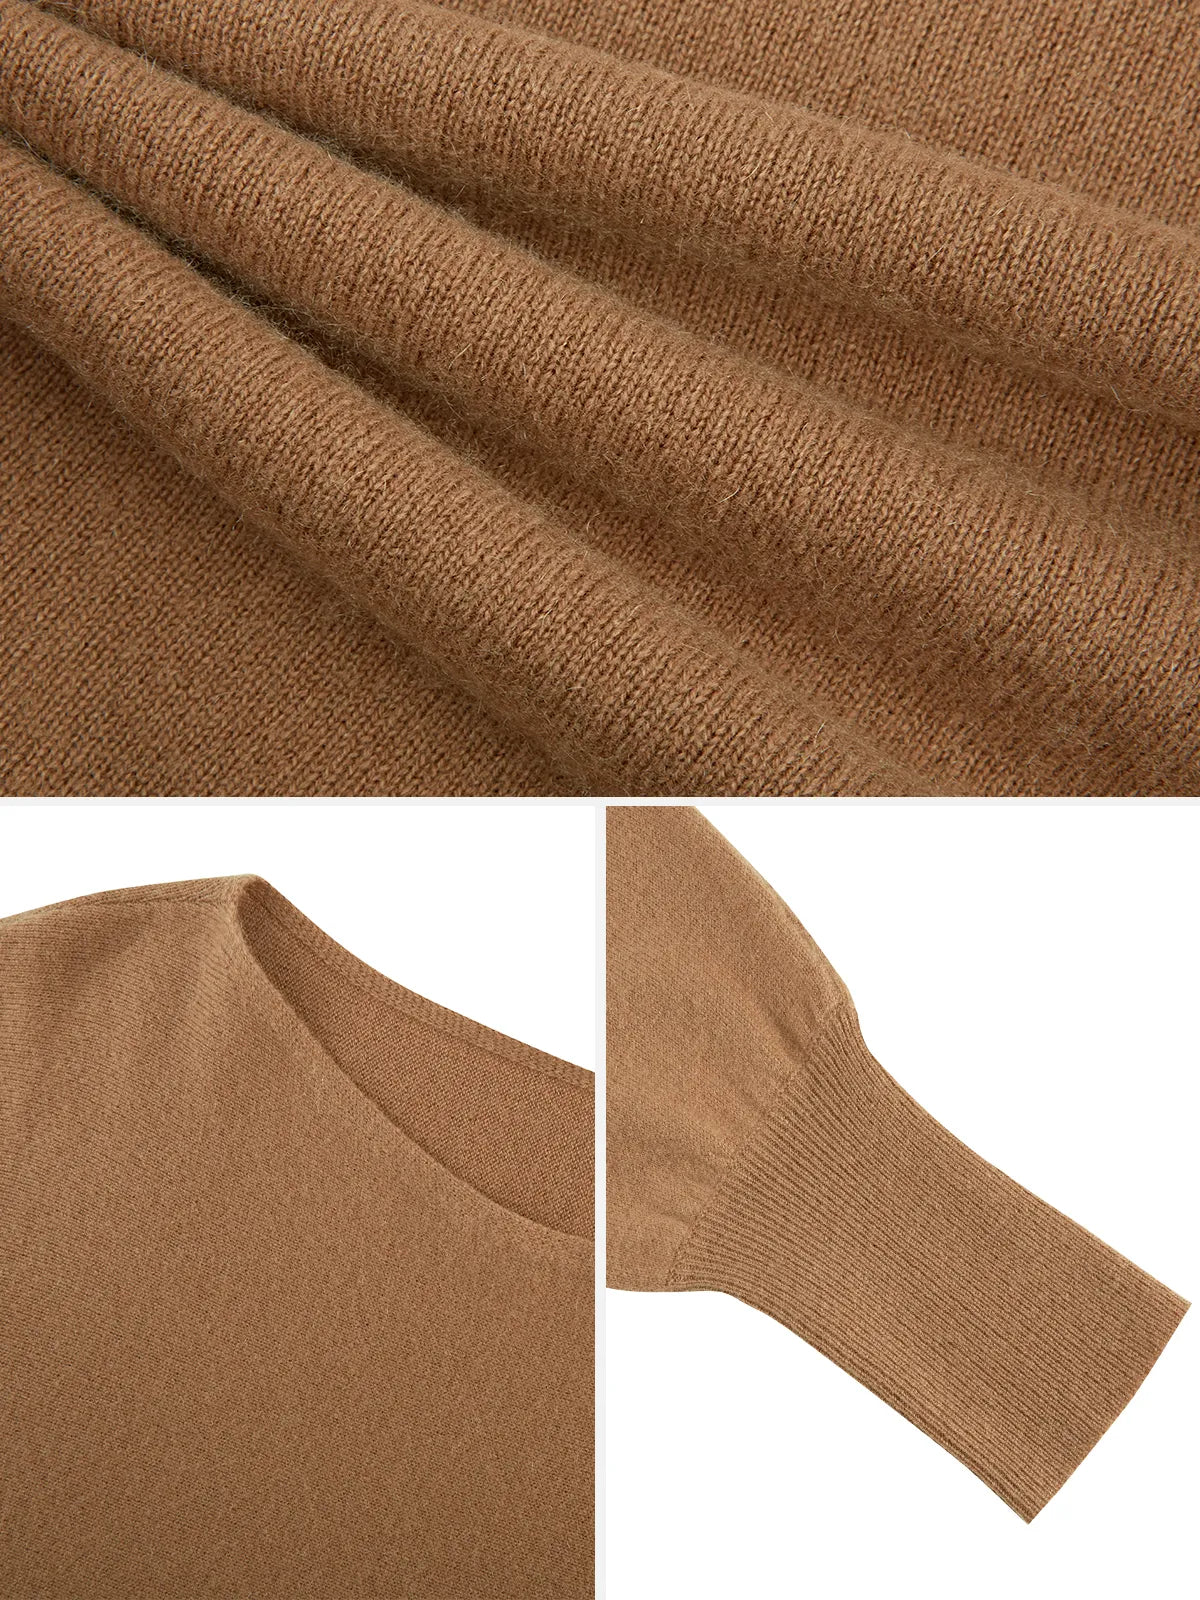  Embrace both fashion and comfort with this solid color cashmere sweater, designed with trendy batwing sleeves and a shorter length for a cozy and stylish winter ensemble.